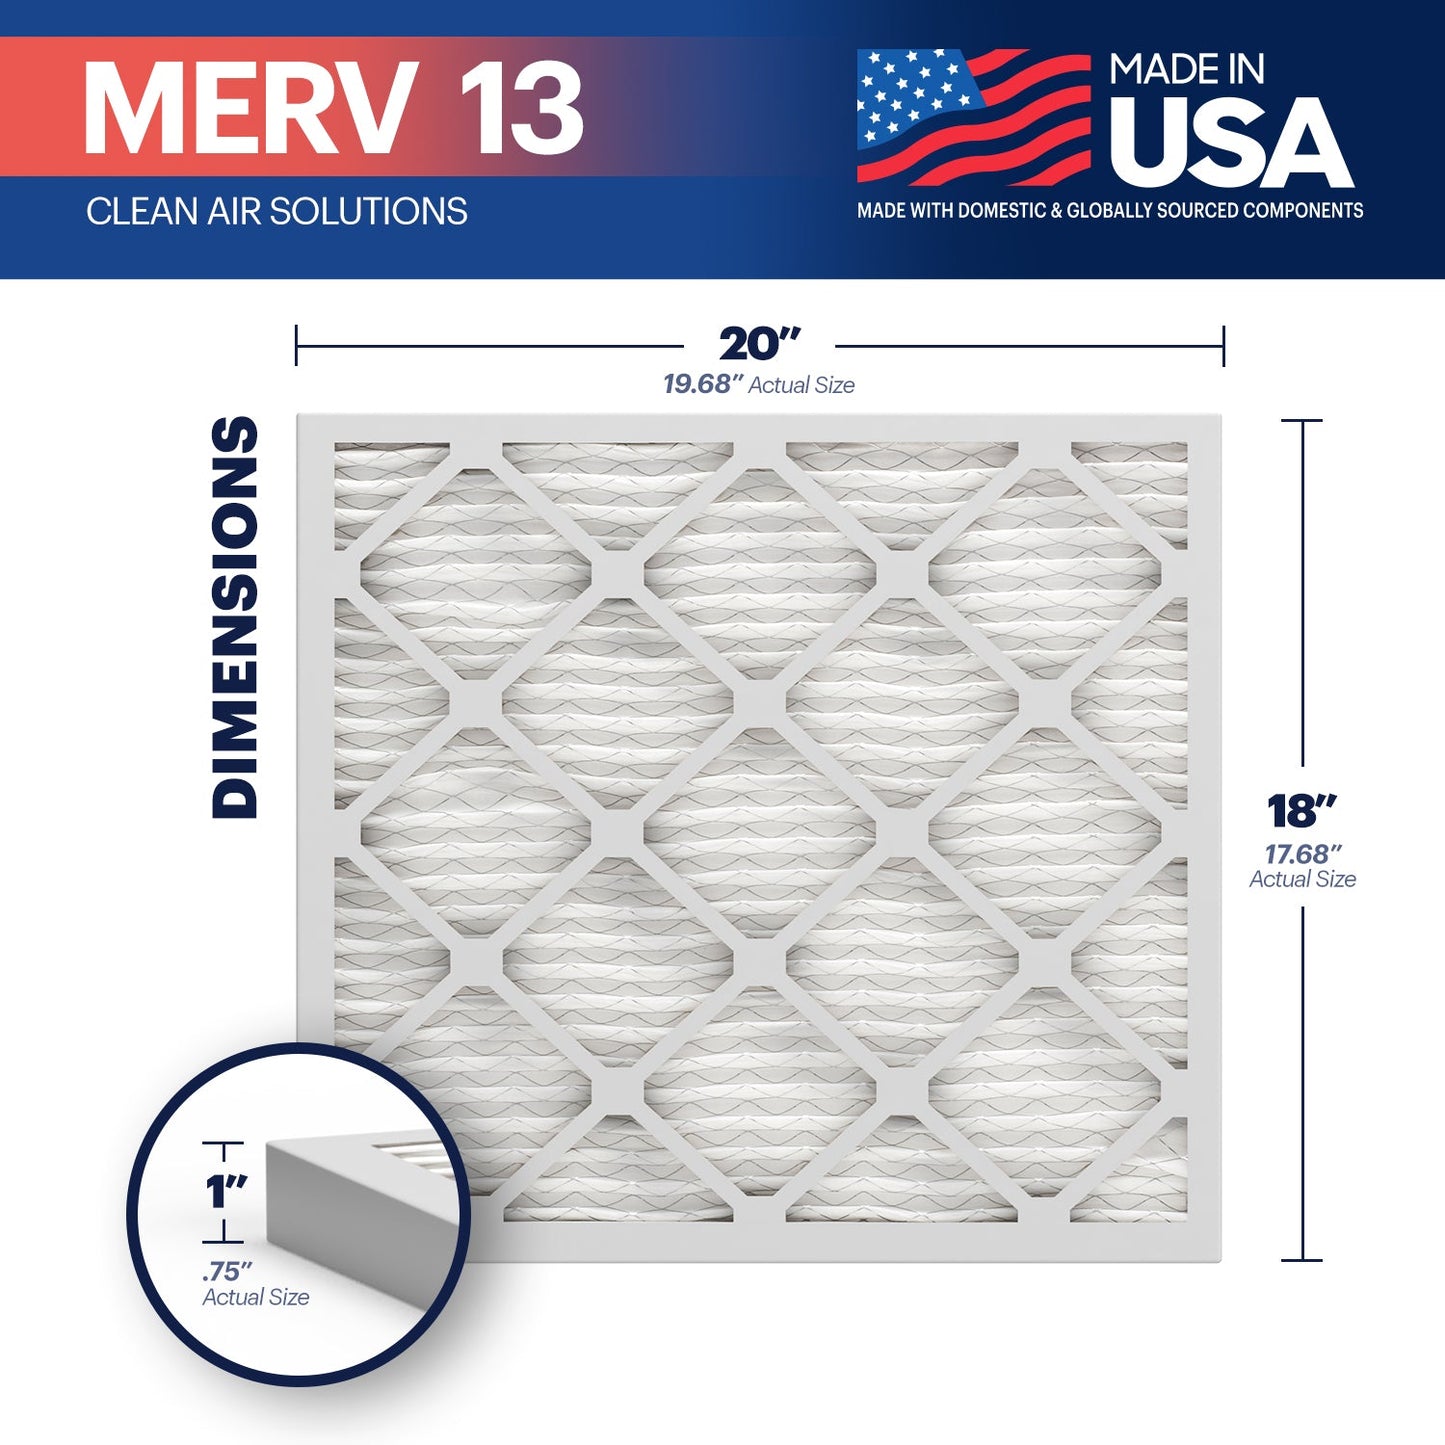 BNX TruFilter 18x20x1 MERV 13 Pleated Air Filter – Made in USA (6-Pack)